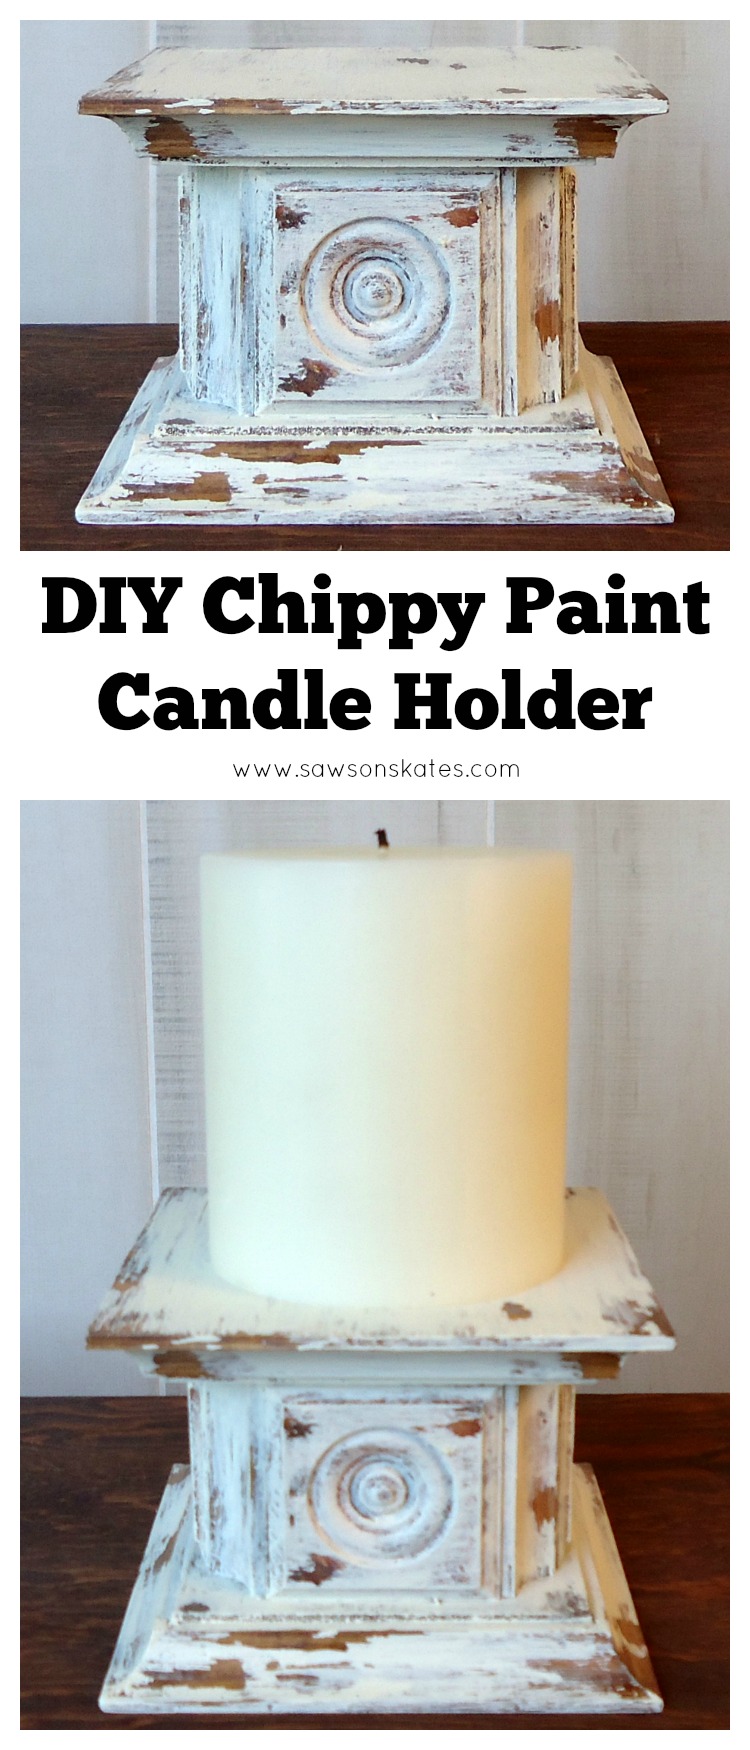 DIY Chic Pen Caddy From A Candle Holder